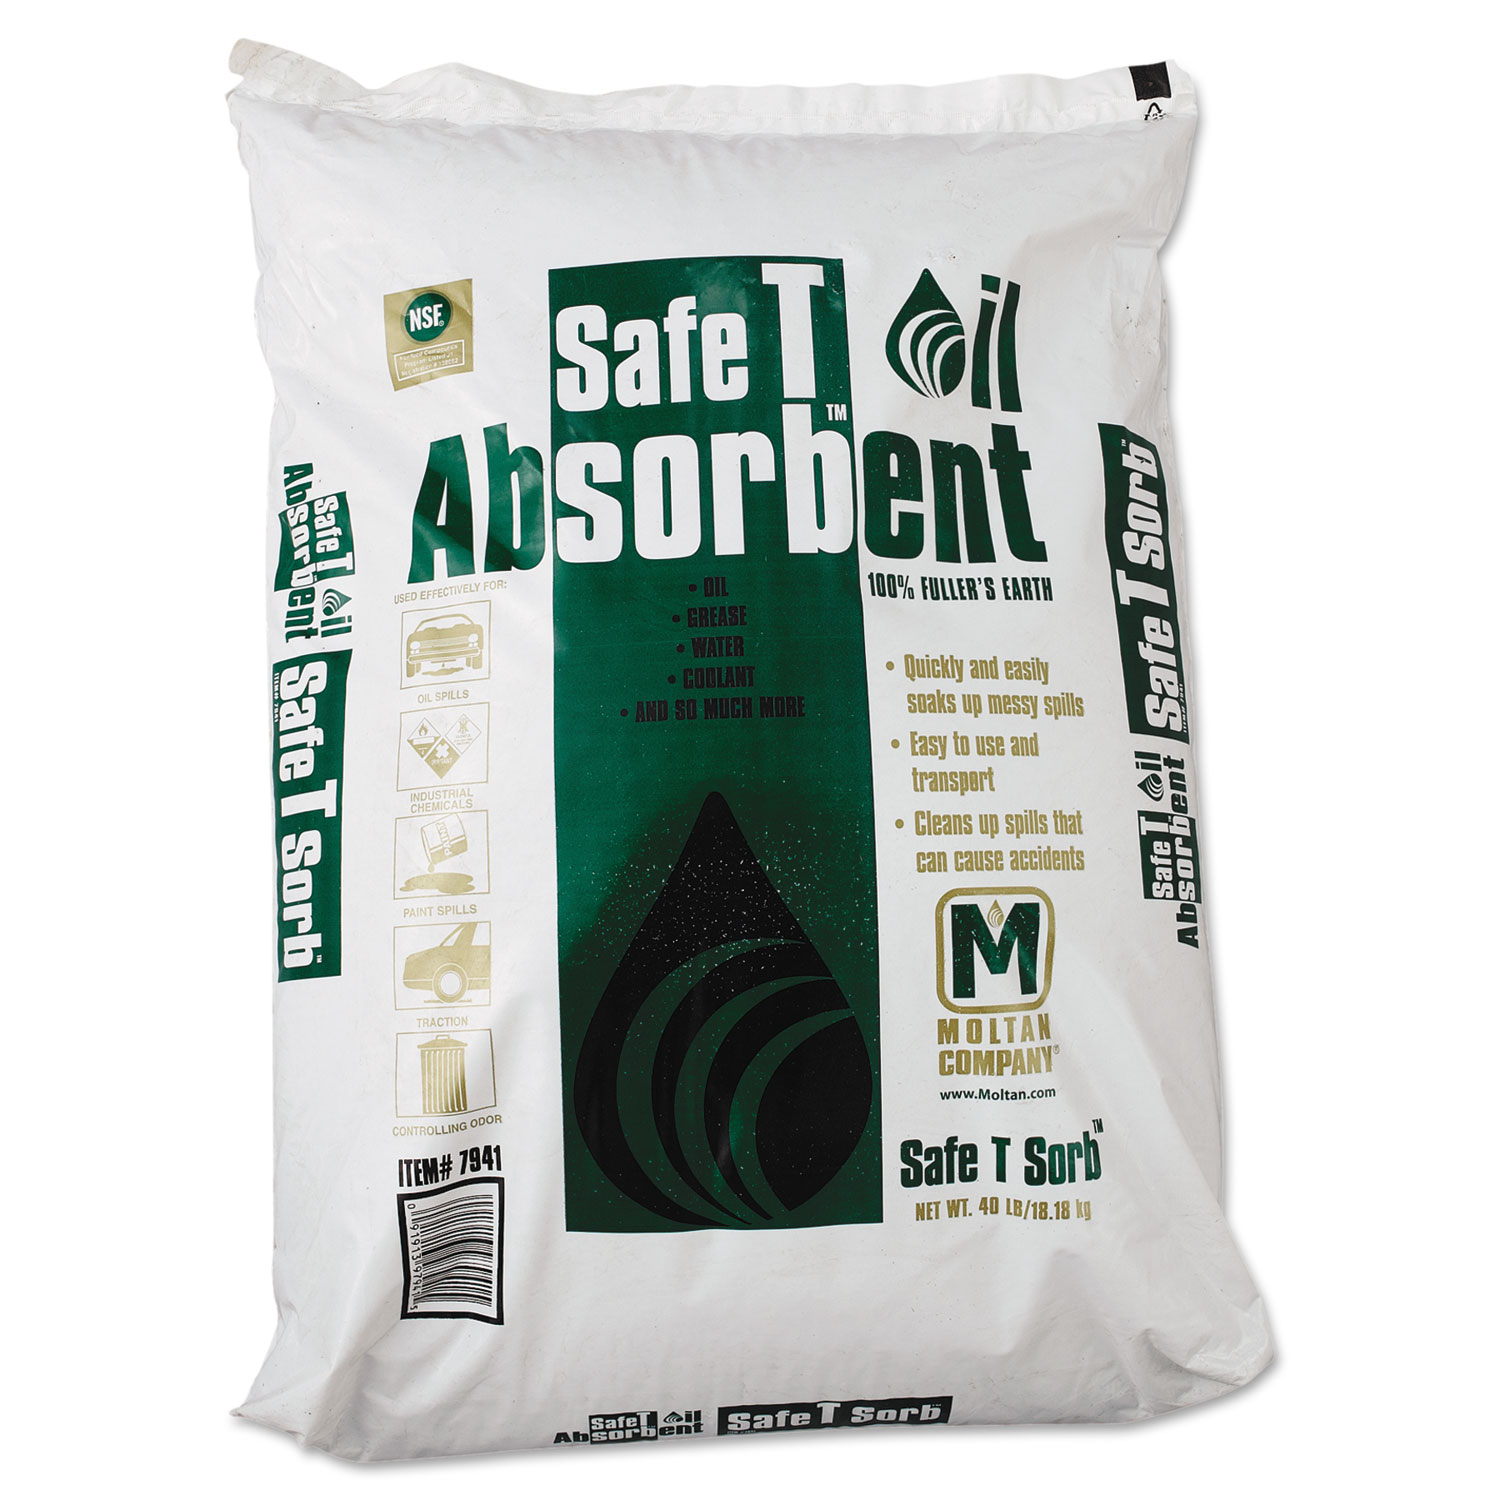 All-Purpose Clay Absorbent, 40lb, Poly-Bag